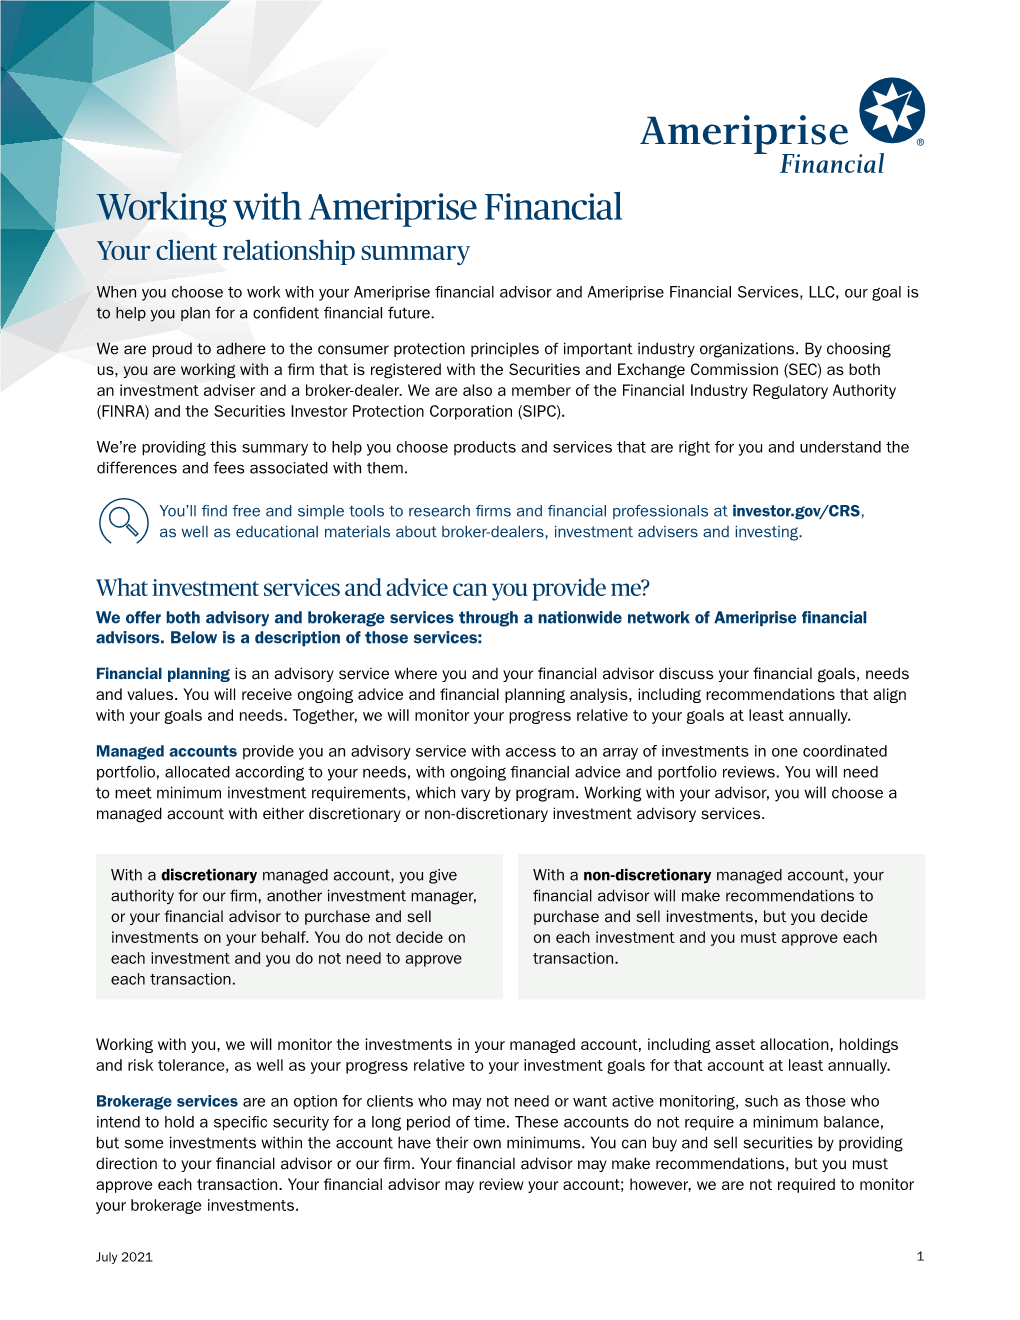 Ameriprise Financial Client Relationship Summary